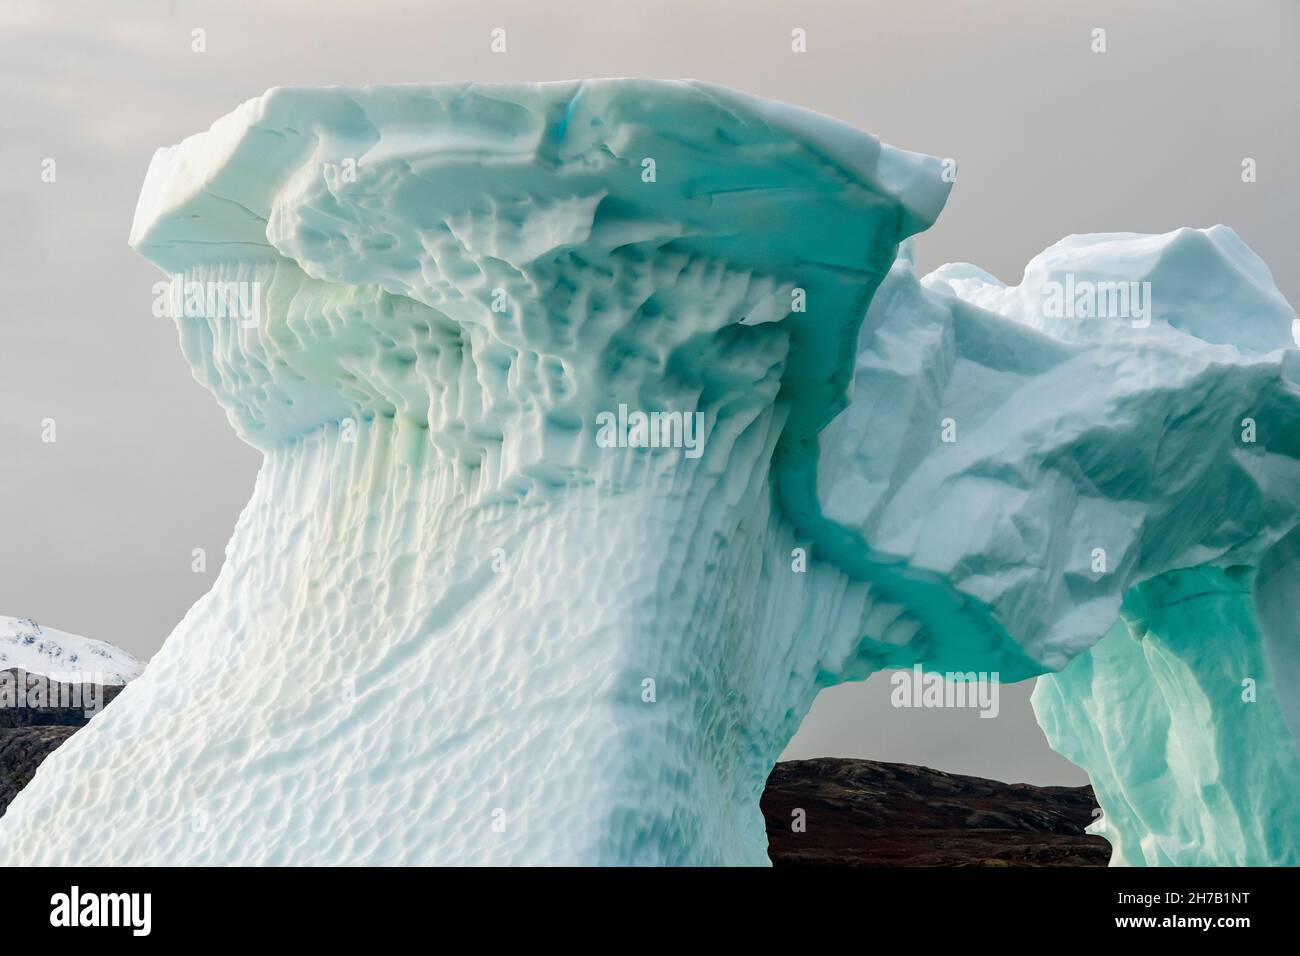 Convoluted iceberg in shades of blue, Rypefjord, Scoresby Sund, East Greenland Stock Photo